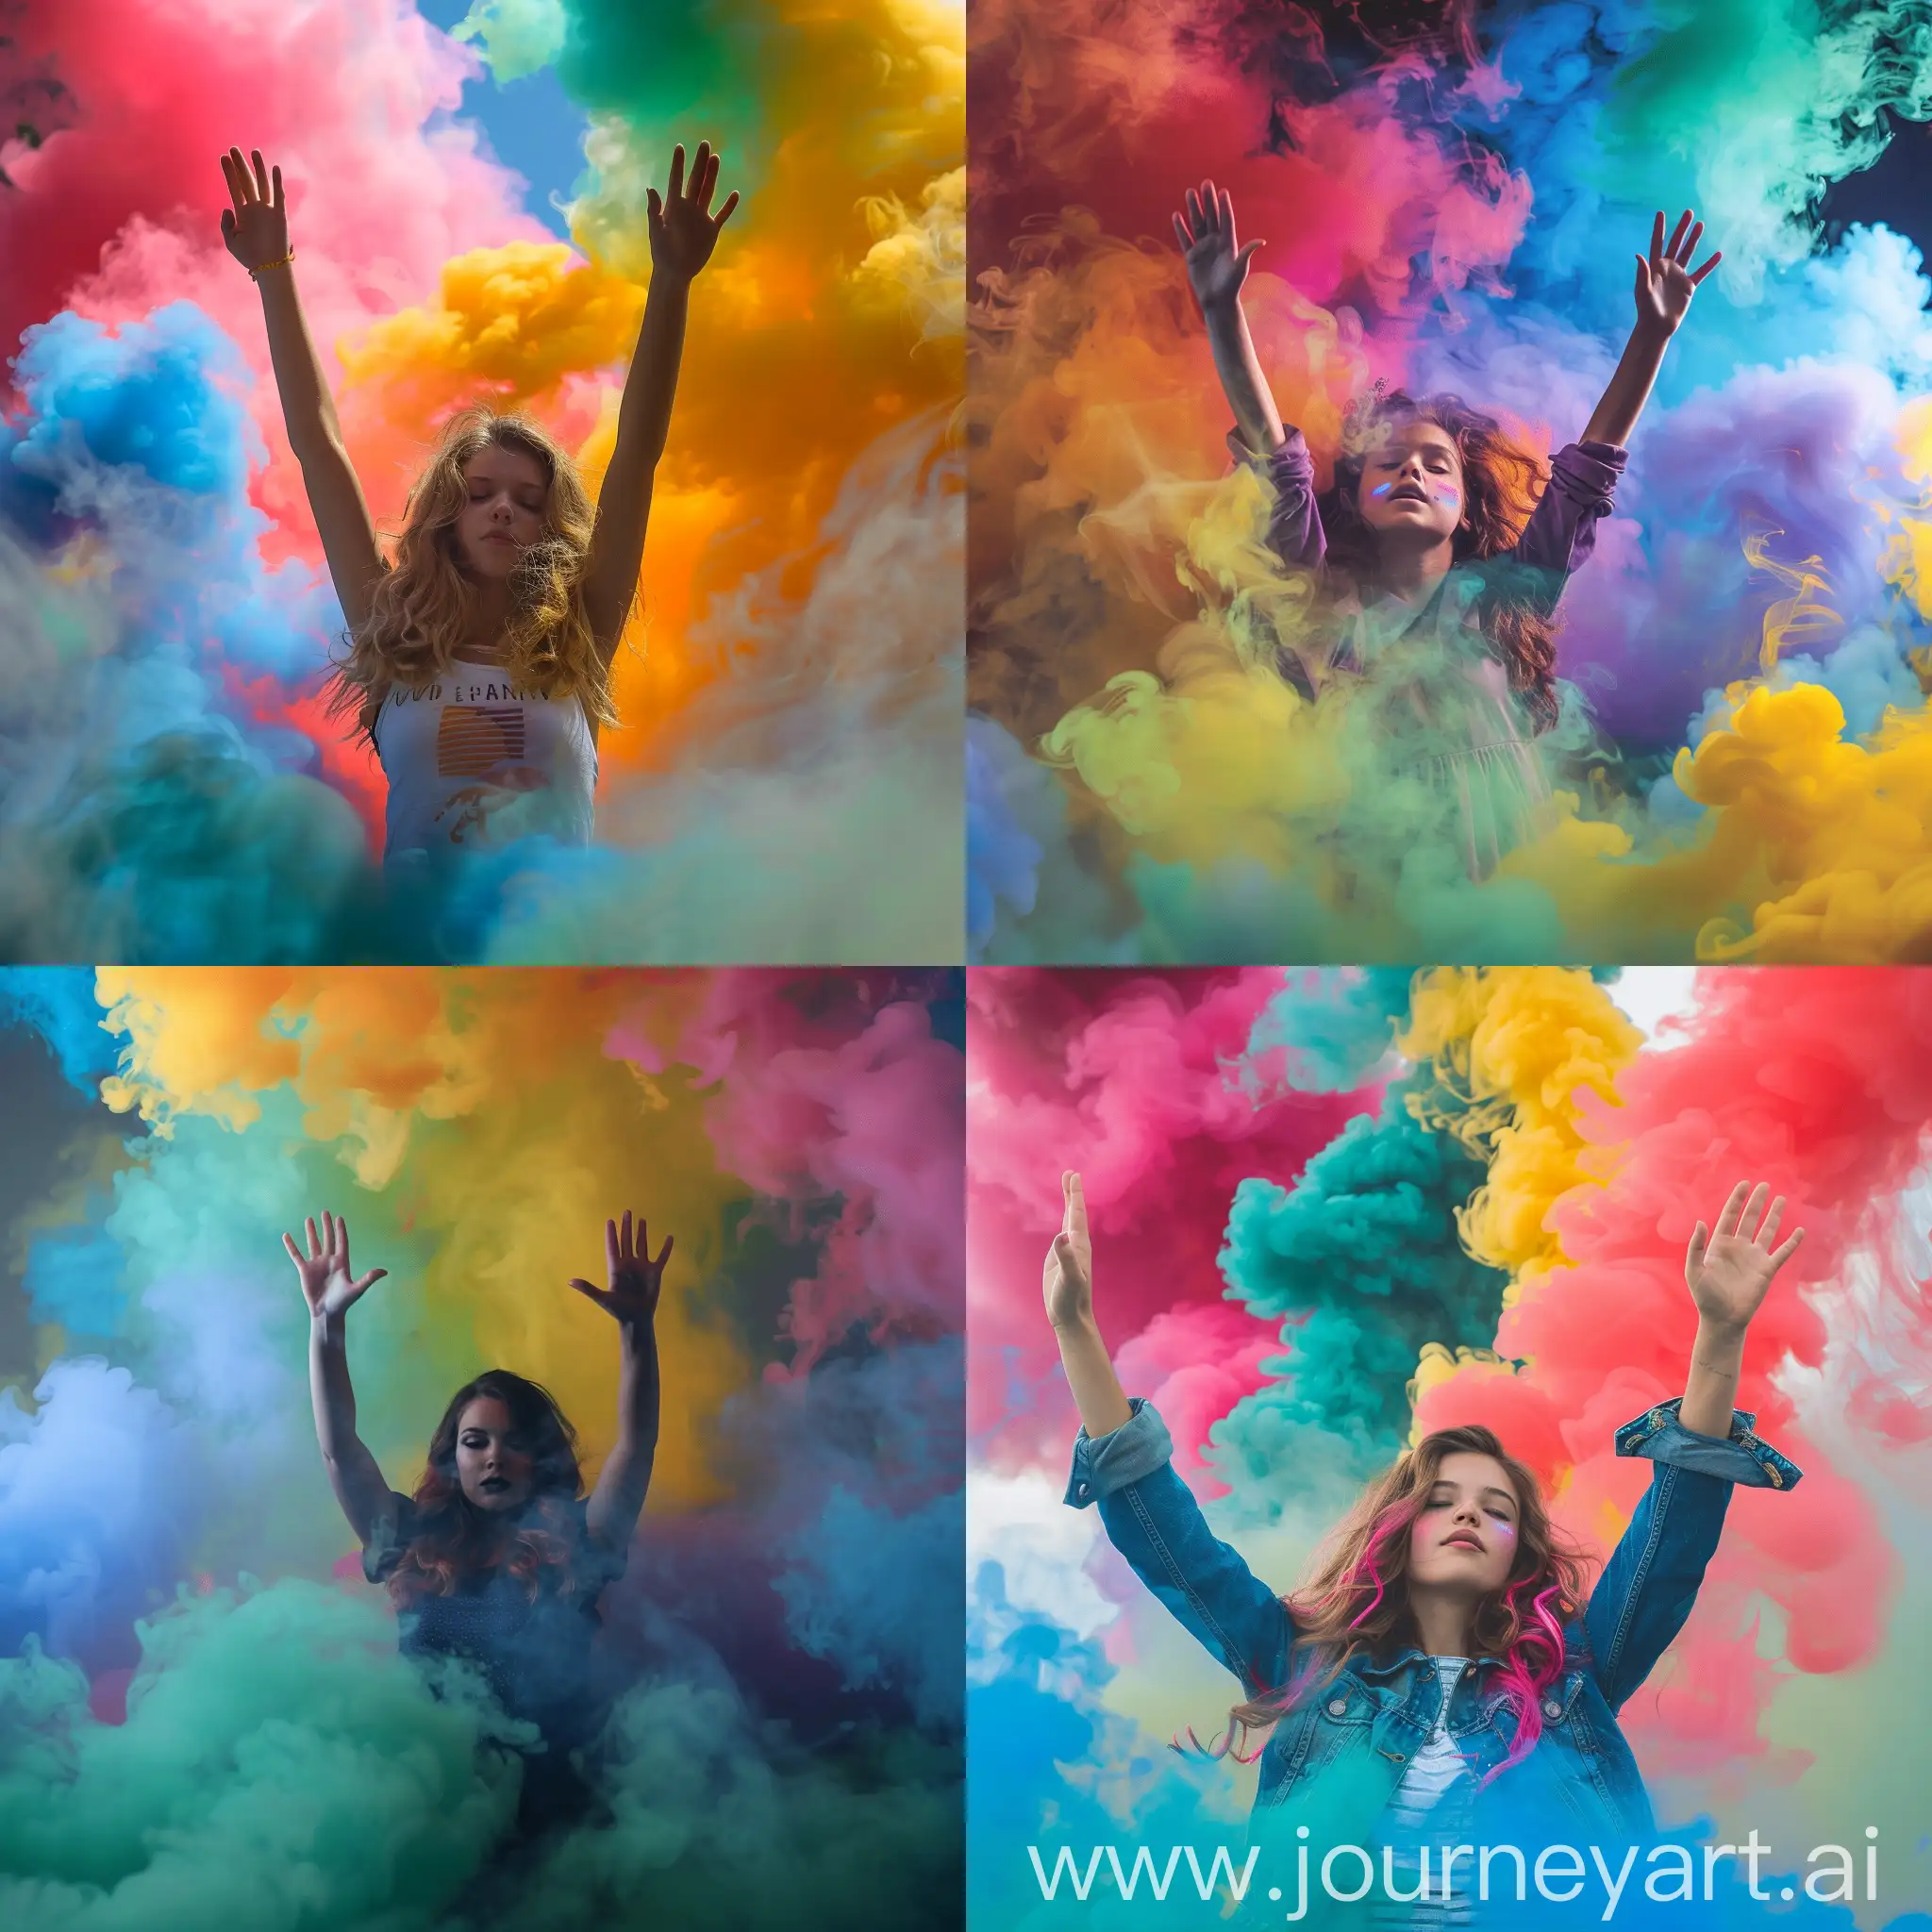 A girl, hands raised high, surrounded by colored smoke